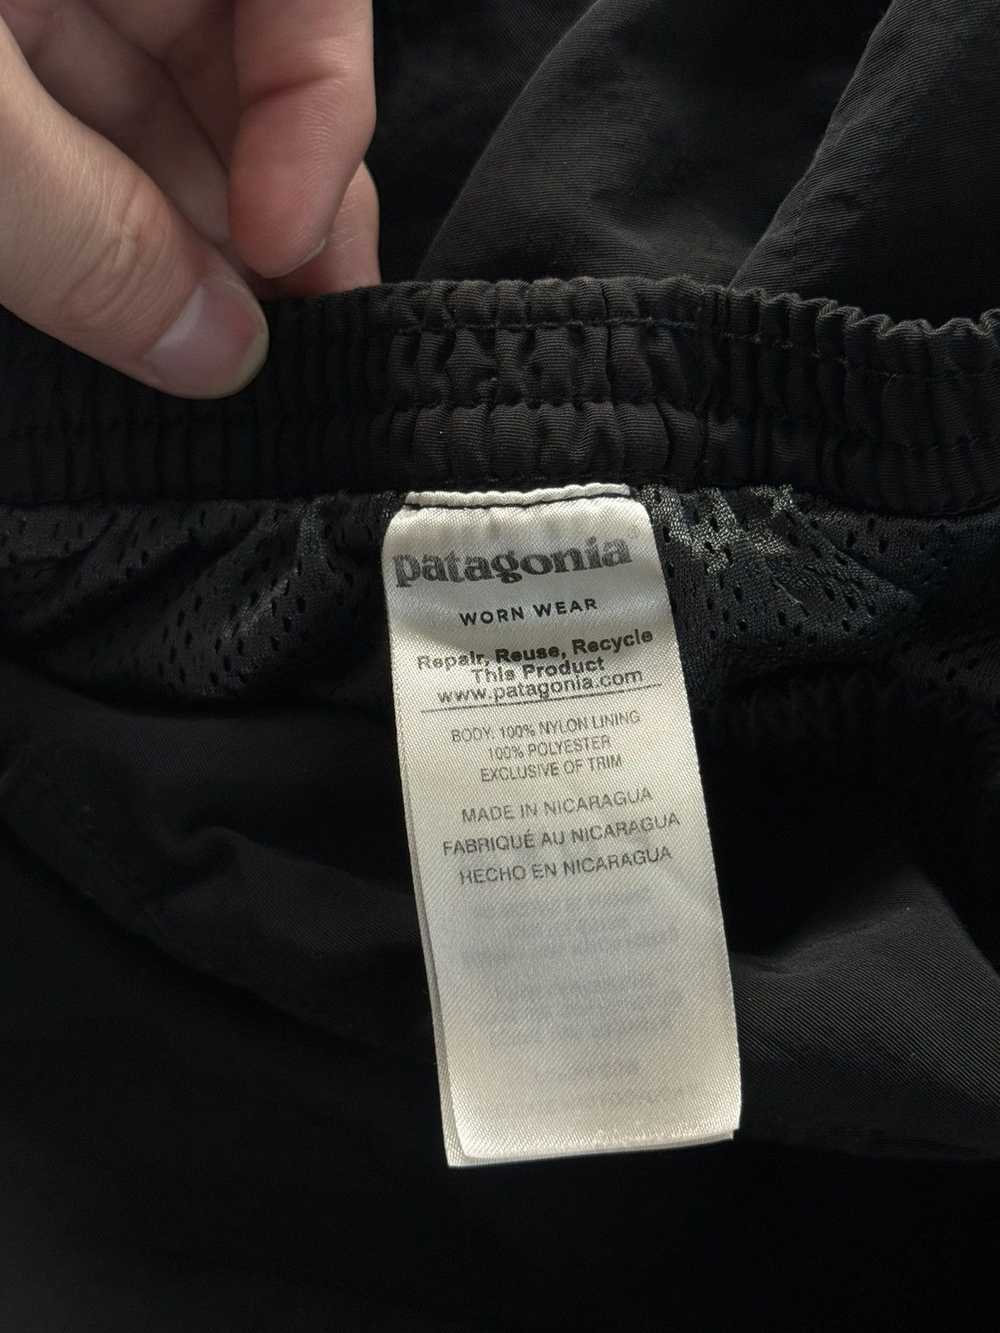 Patagonia 5” Baggie Shorts with Nets Black XL - image 6